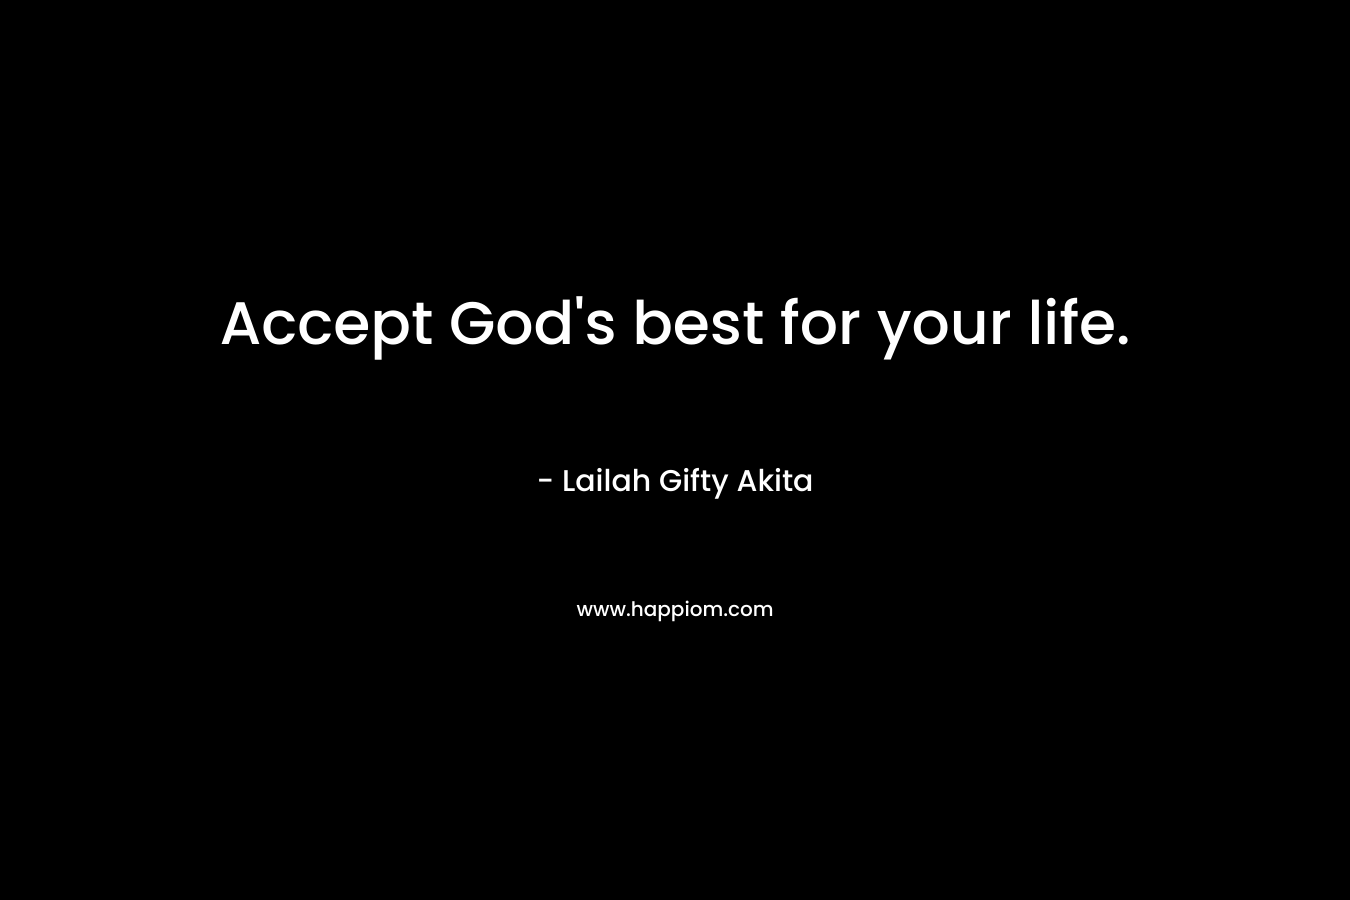 Accept God's best for your life.